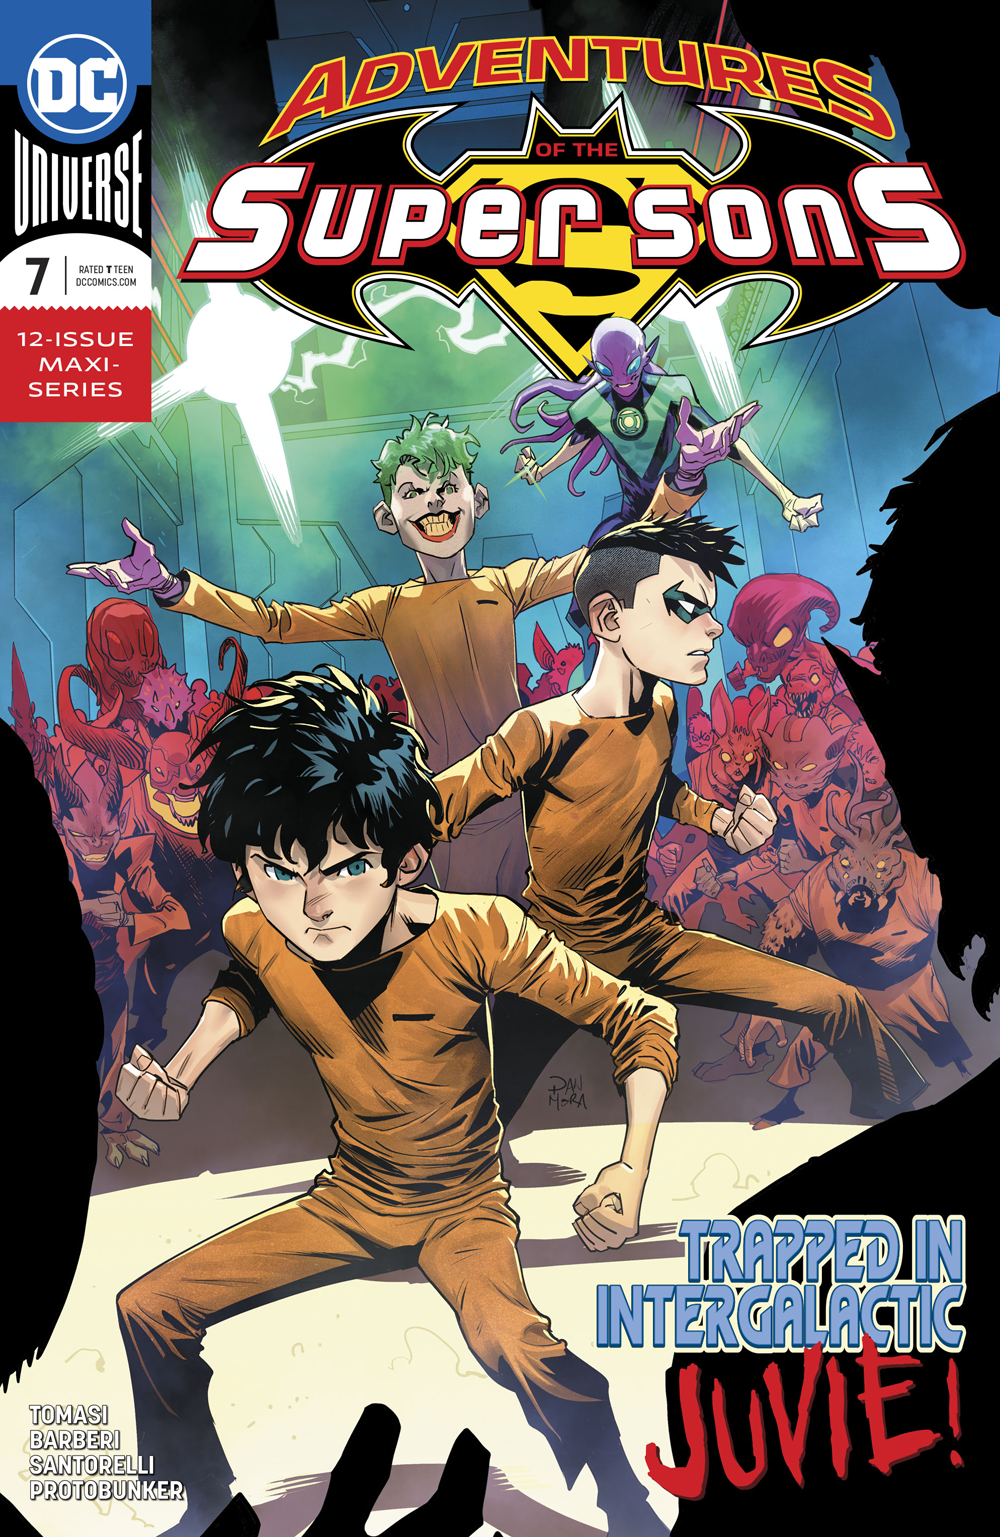 Adventures of the Super Sons no. 7 (7 of 12) (2018 Series)